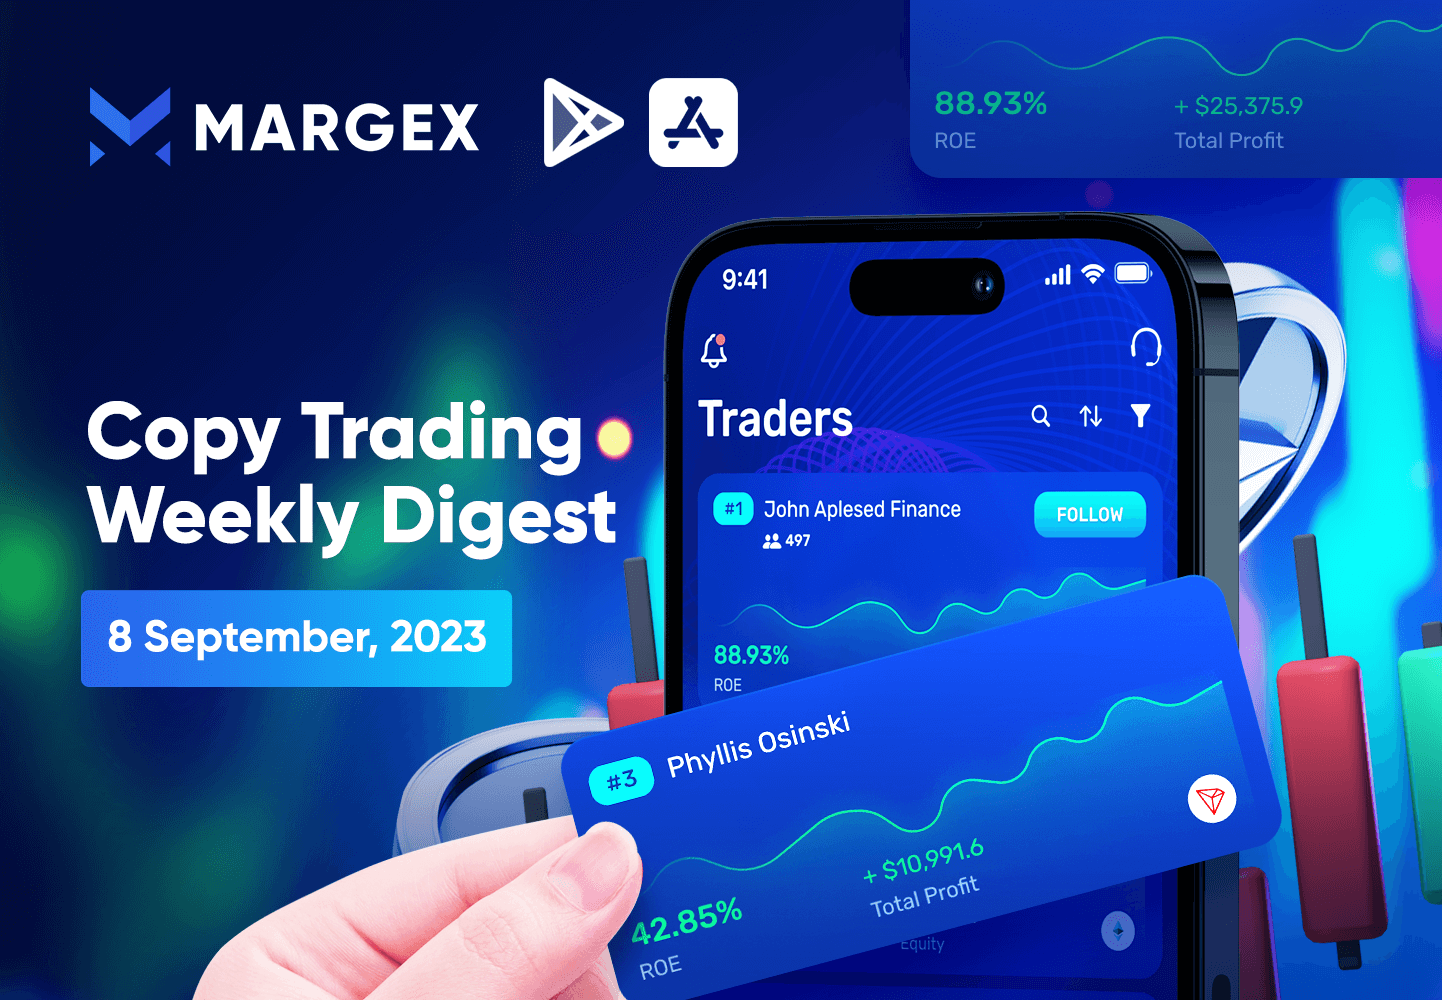 Copy Trading Weekly Digest September 8, 2023